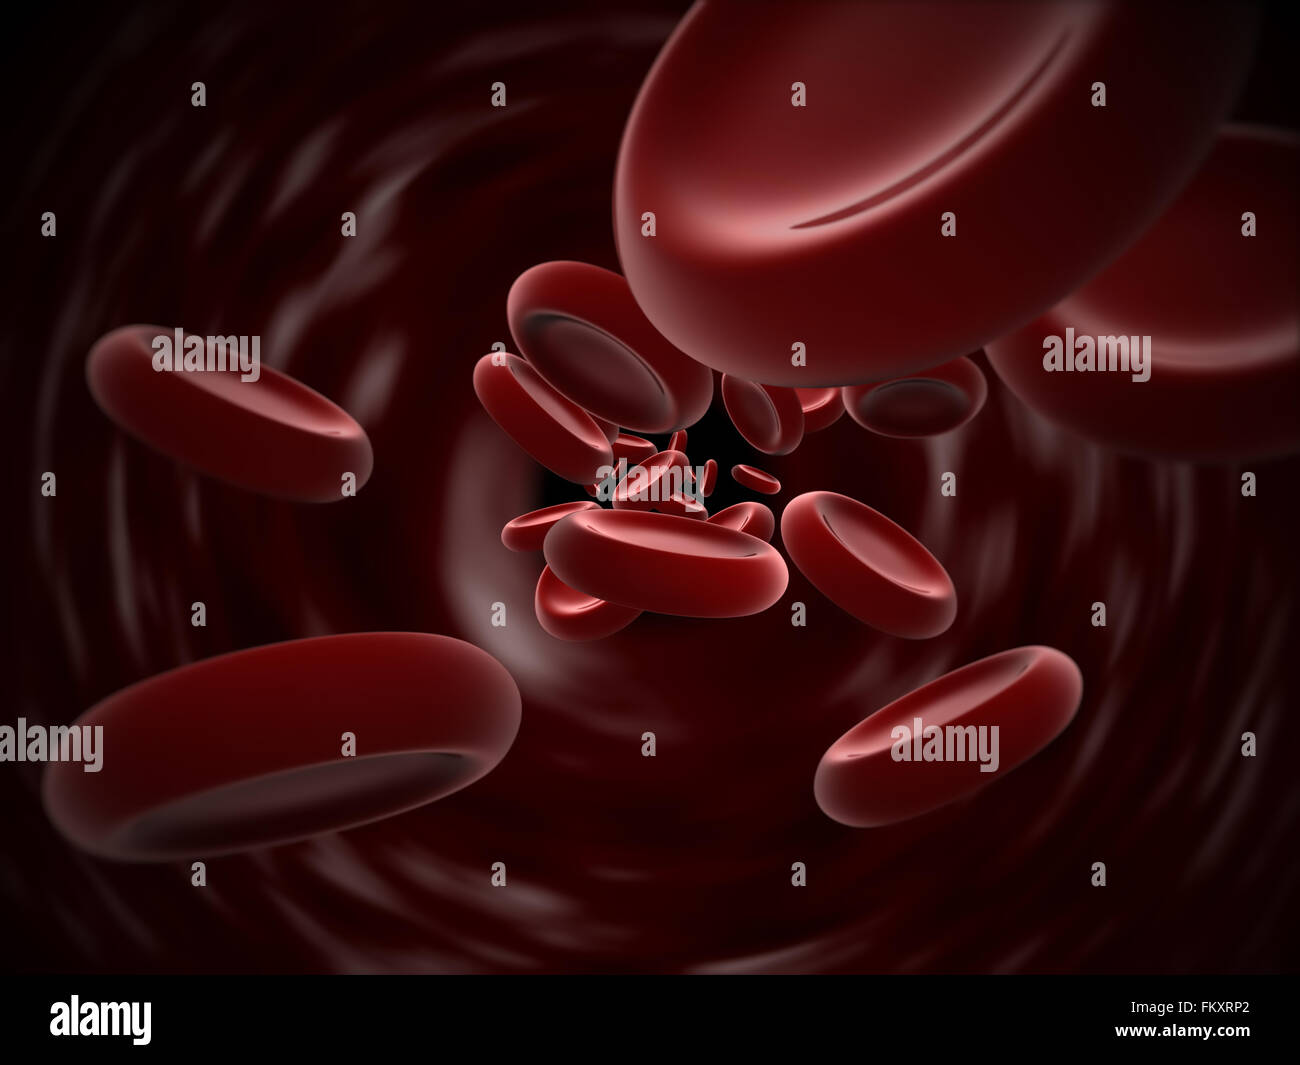 Red blood cells, medical, health, biology, cardiology Stock Photo